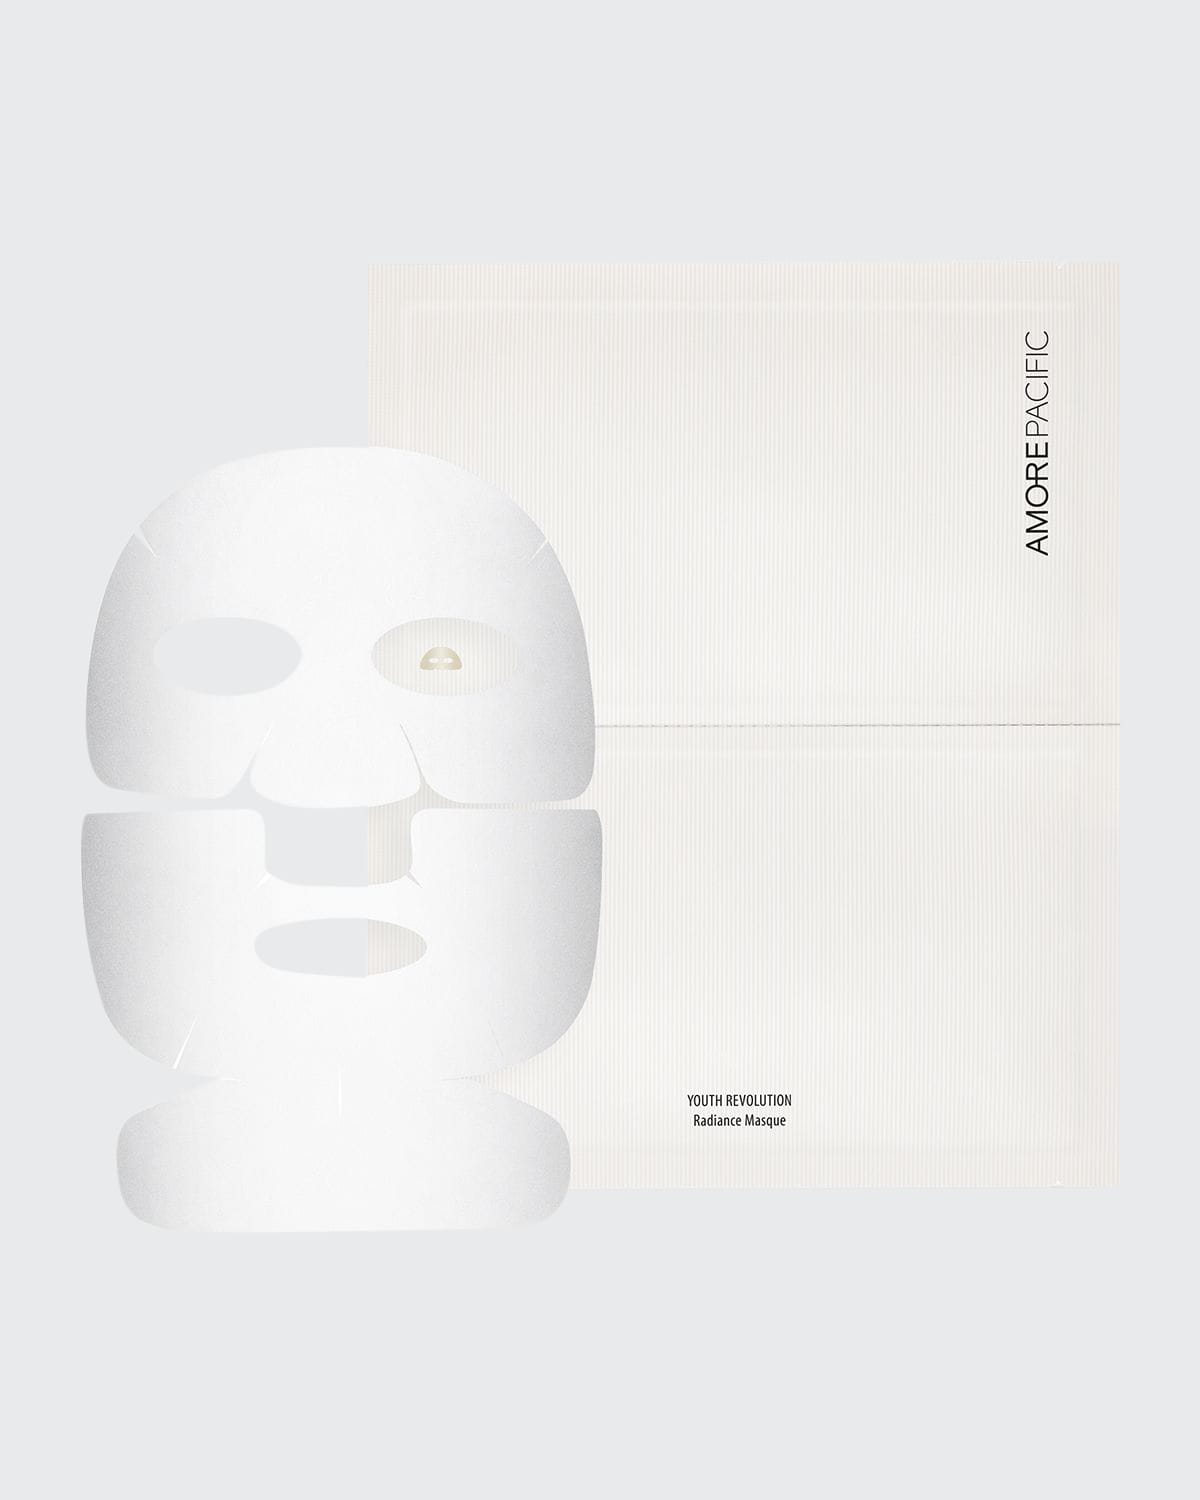 Youth Revolution Radiance Masque (6 Sheets)